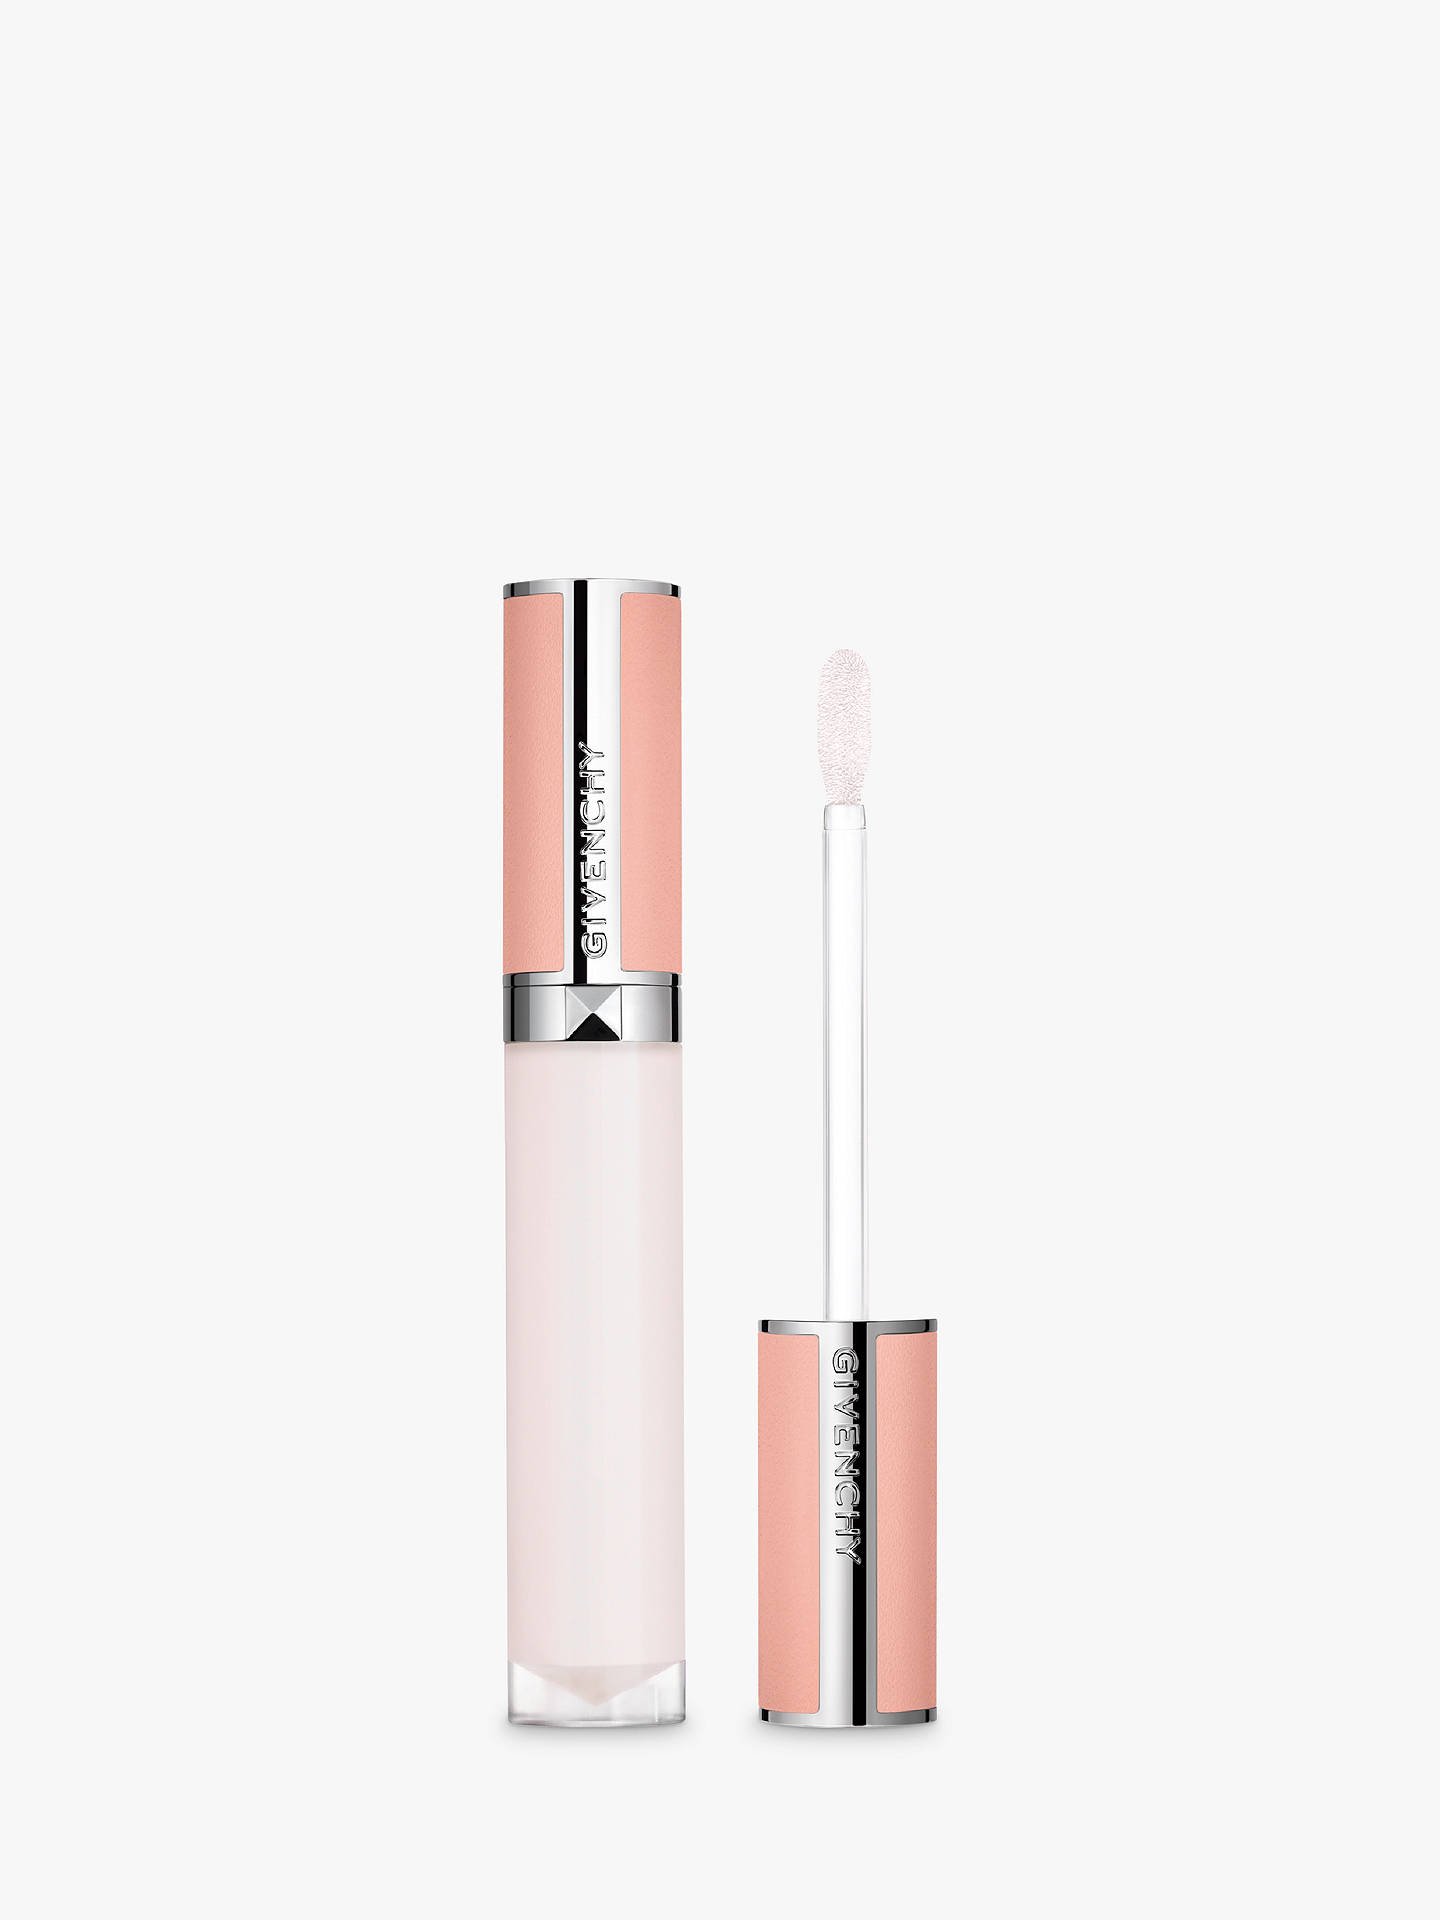 Givenchy Le Rose Perfecto Liquid Balm 10 FROSTED NUDE, 6 